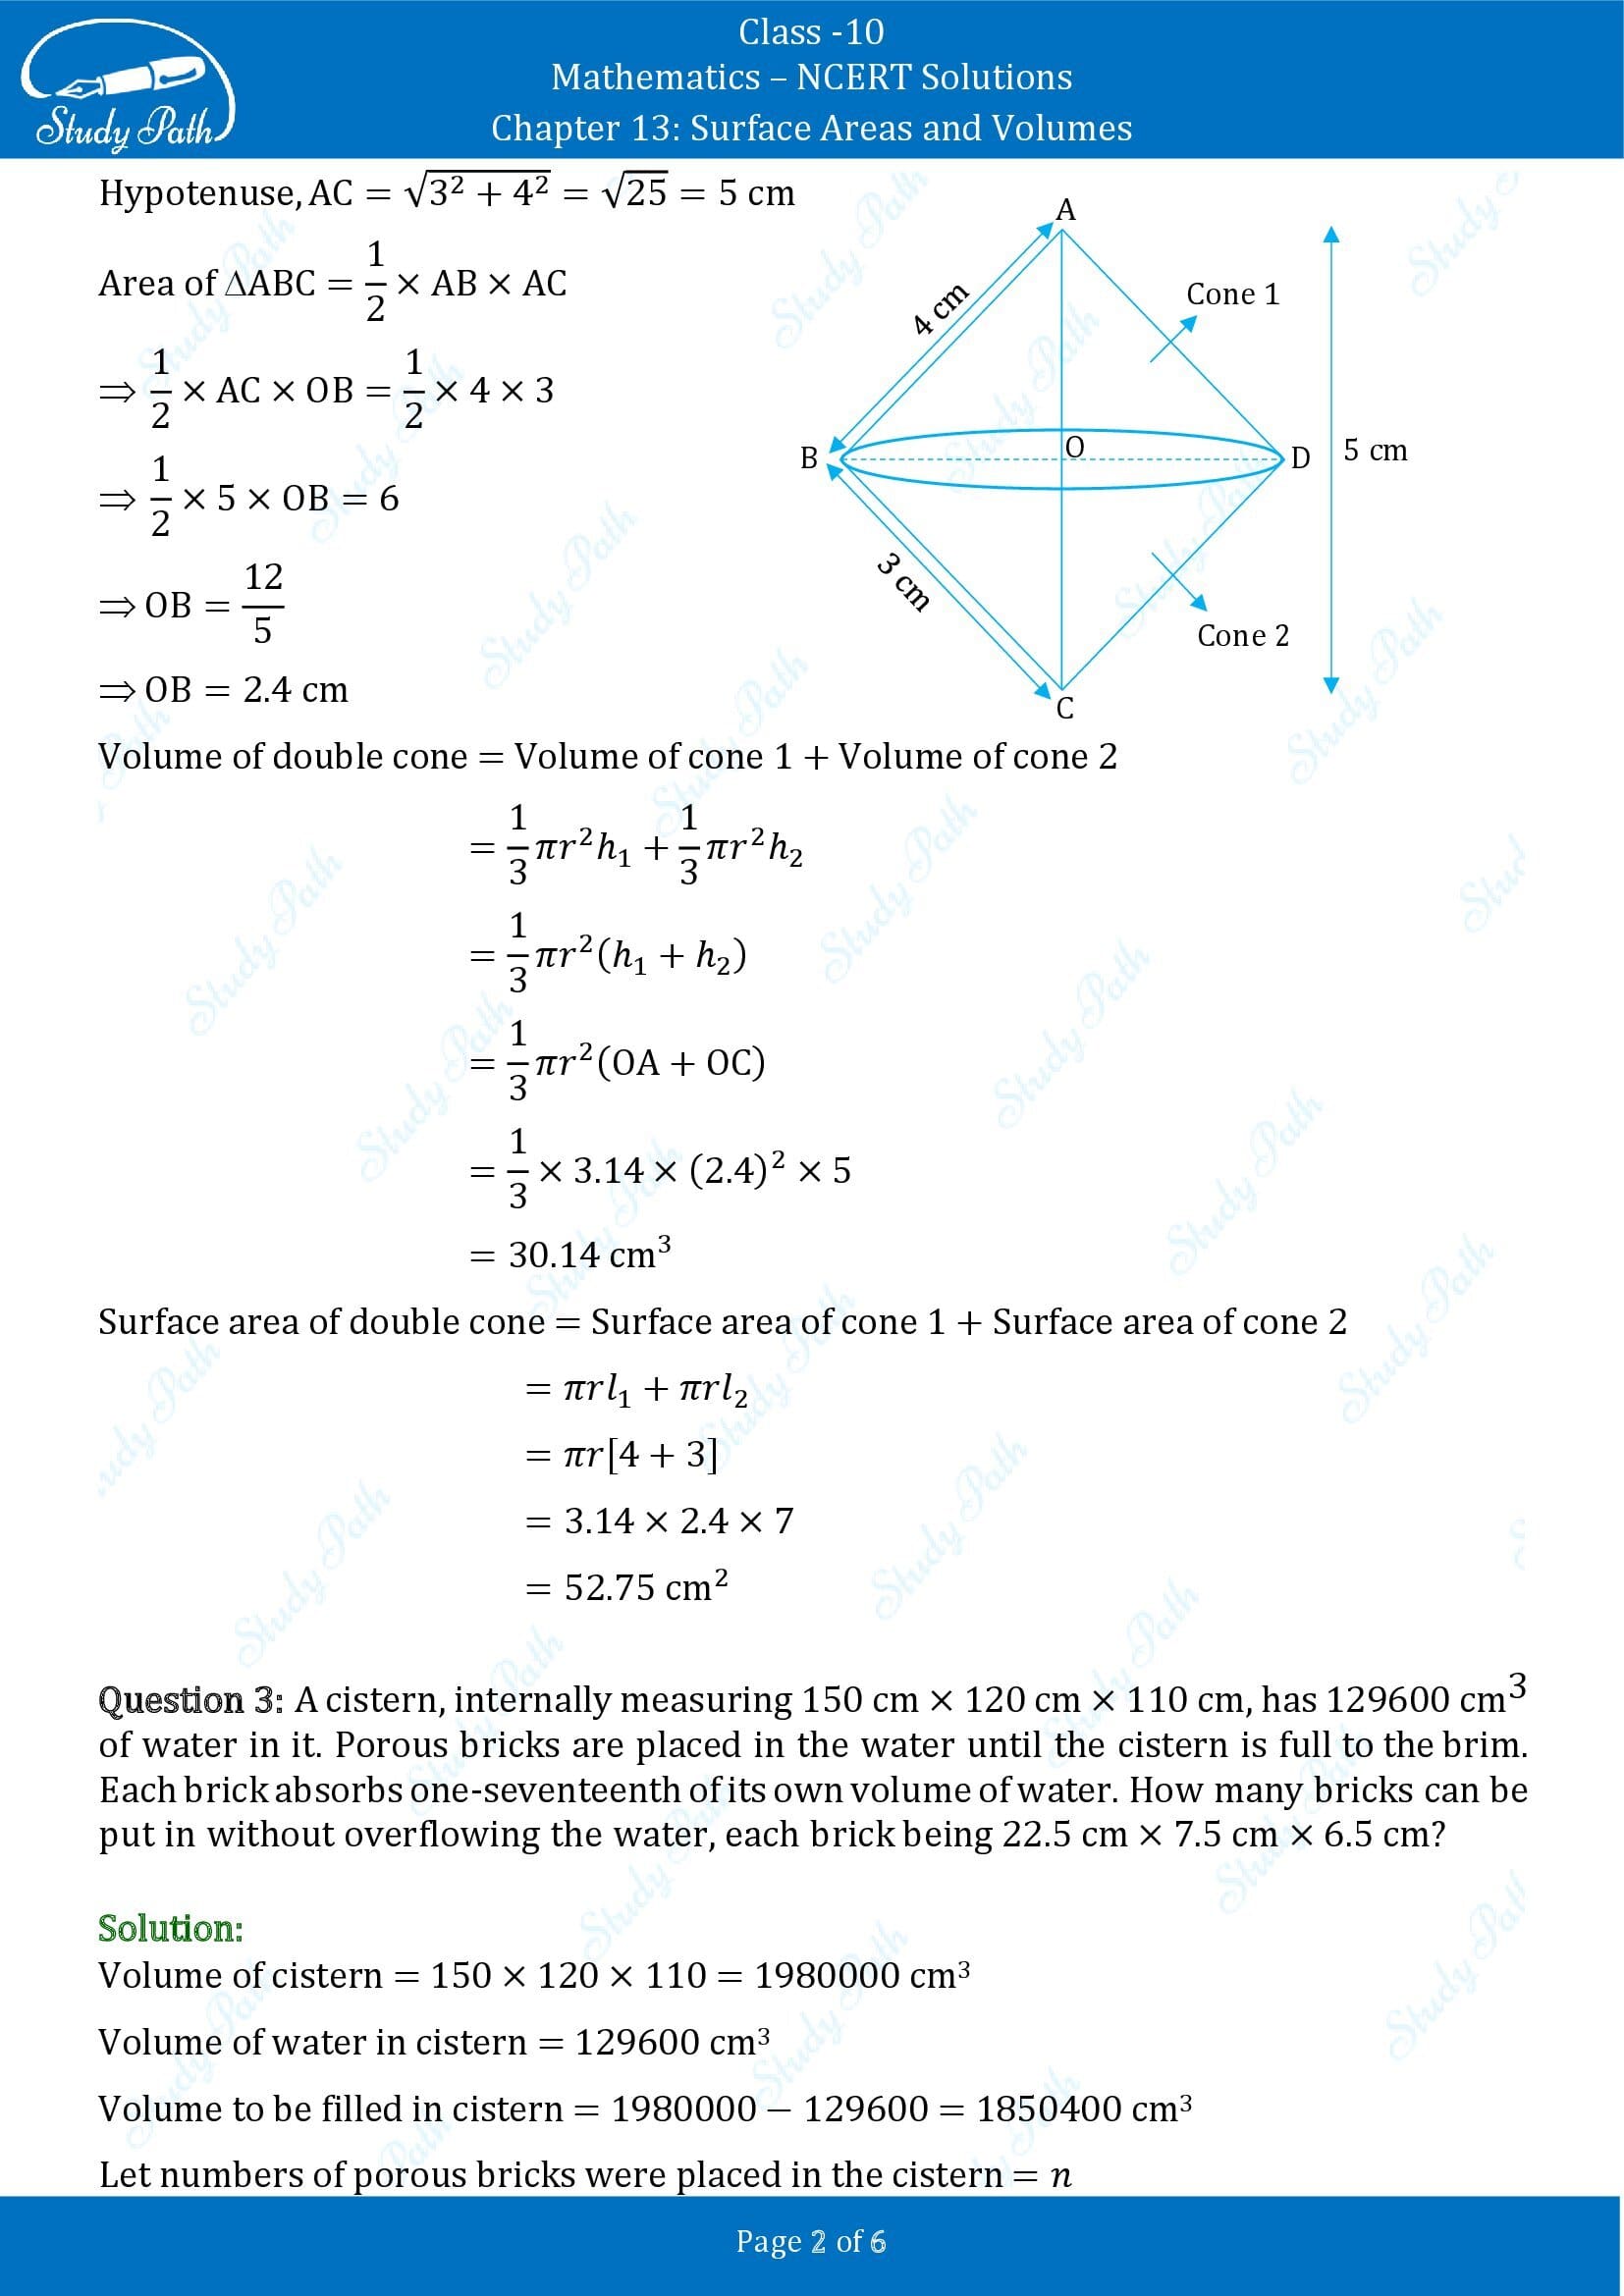 NCERT Solutions for Class 10 Maths Chapter 13 Surface Areas and Volumes Exercise 13.5 00002